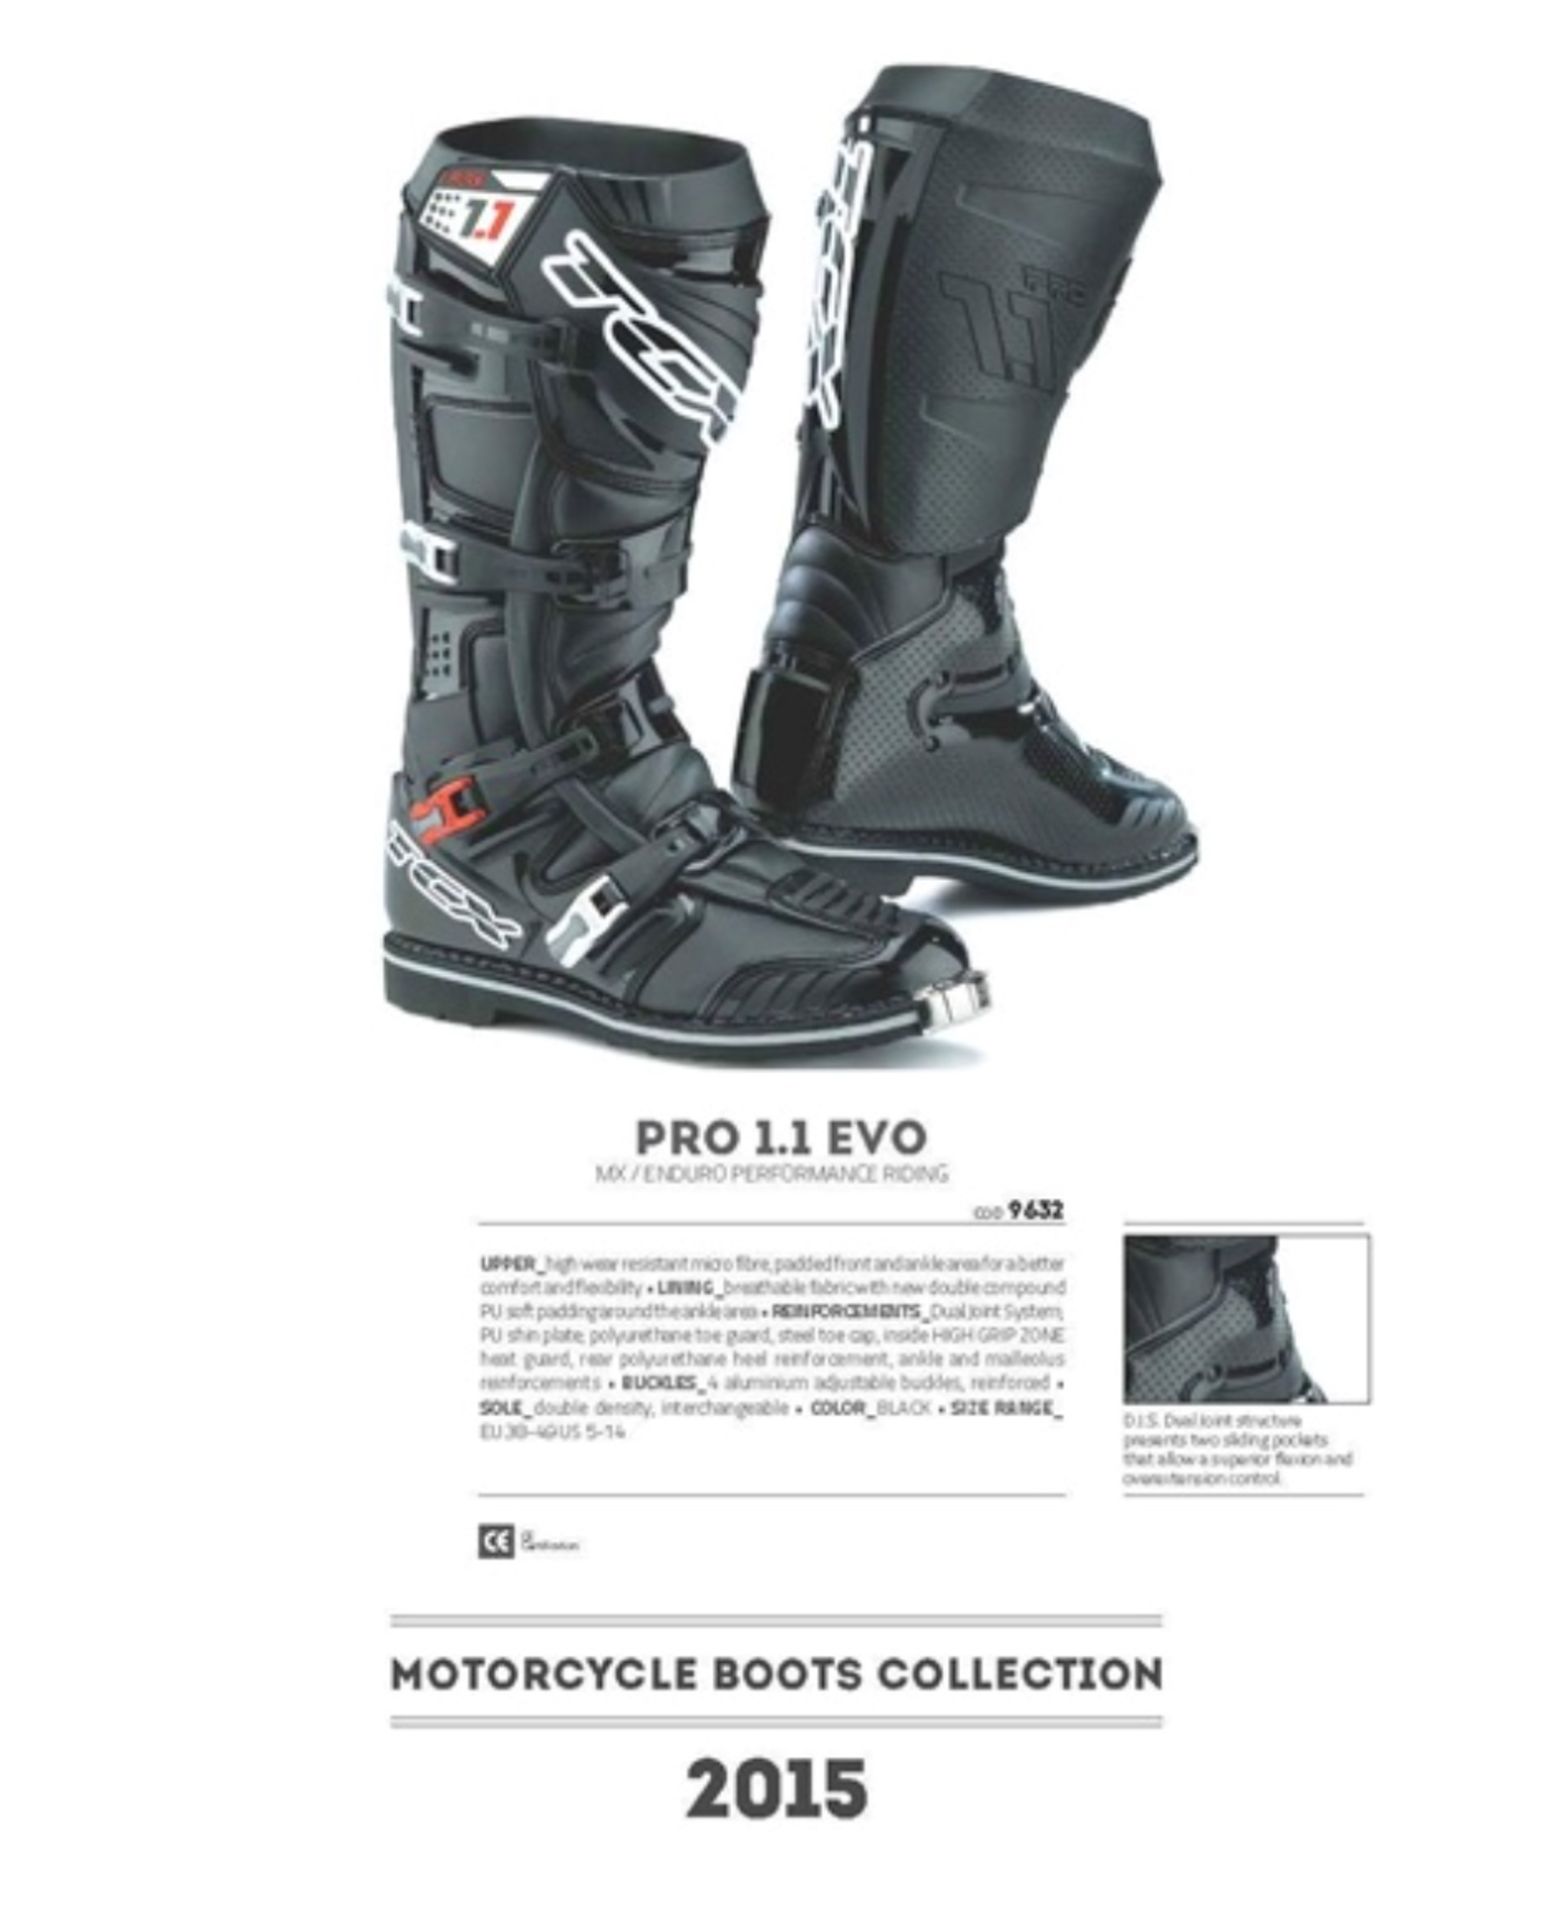 TCX Pro 1.1 Evo Motocross Boots
UPPER: High wear resistant micro fibre, padded front and ankle area - Image 4 of 4